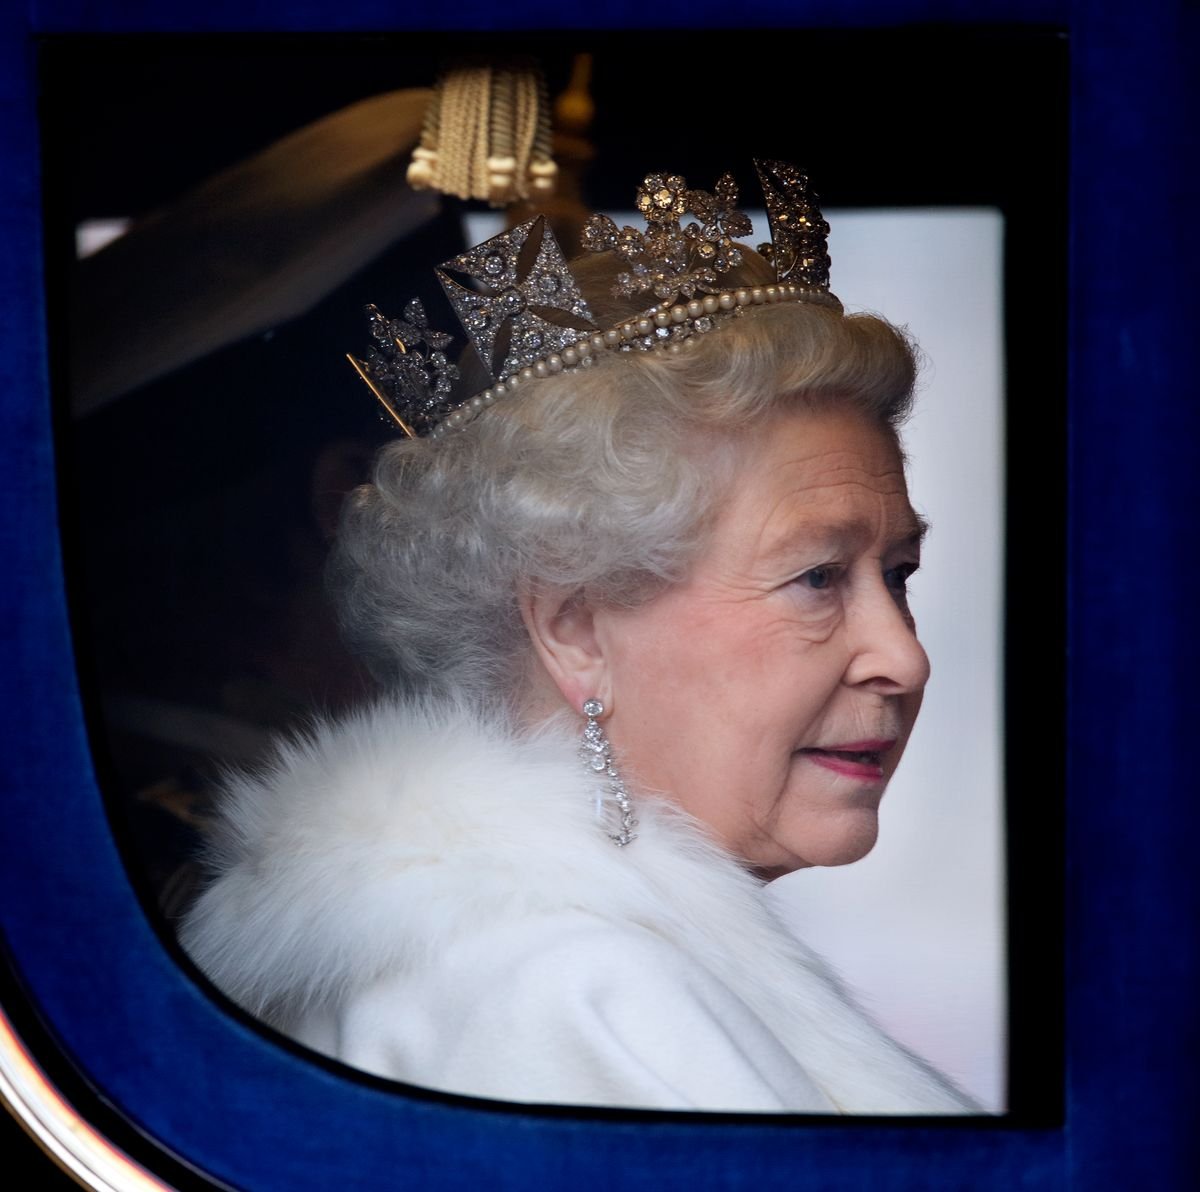 Queen Elizabeth II looks out the window while riding in a coach.